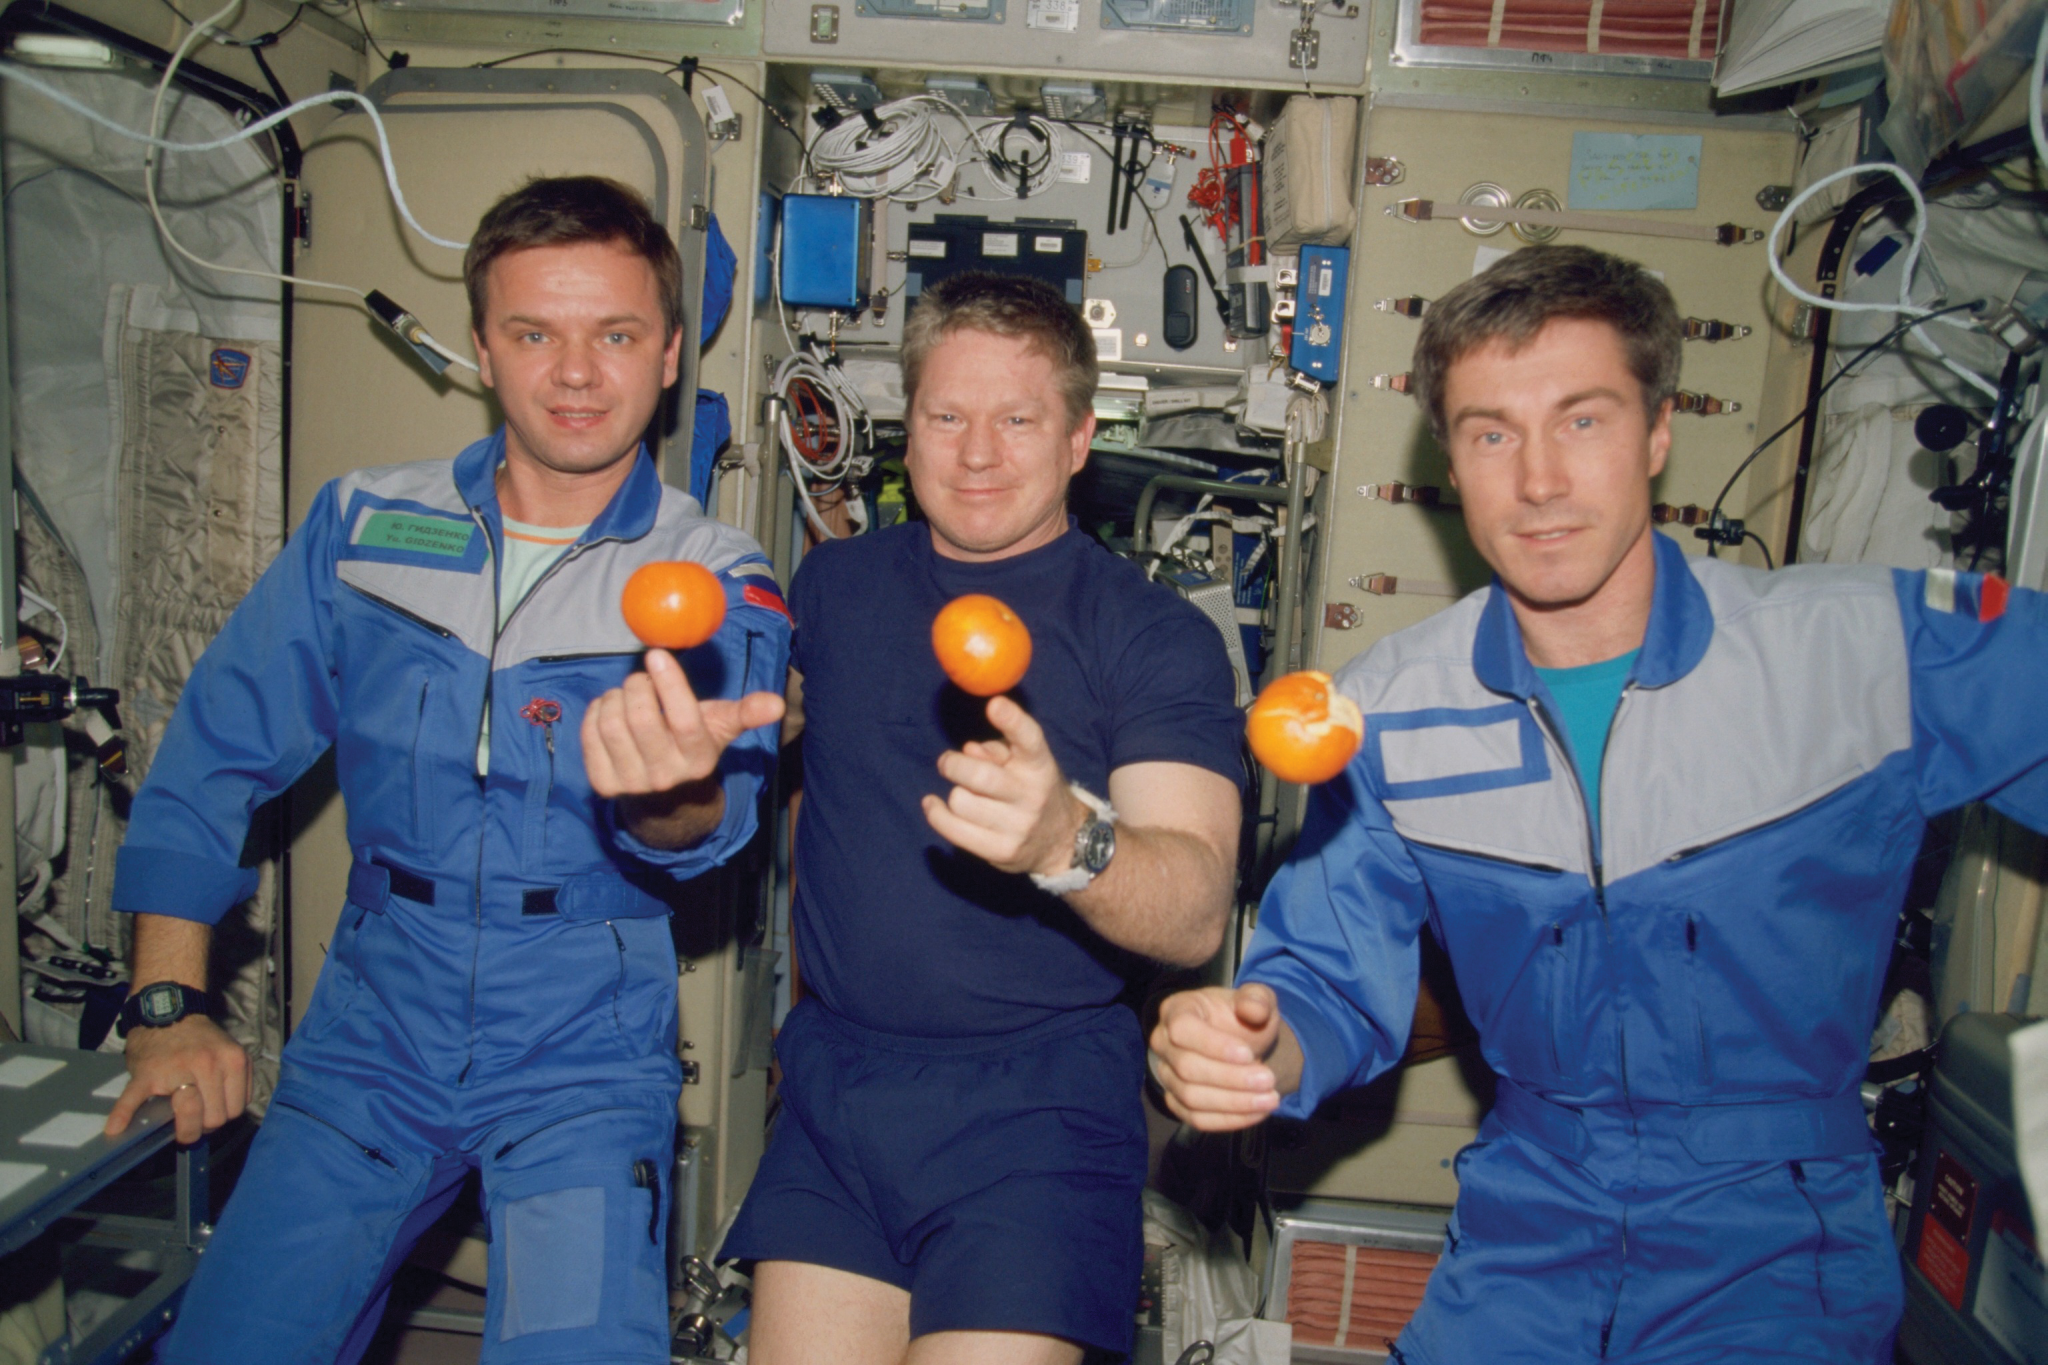 image of the crew with floating oranges in front of them